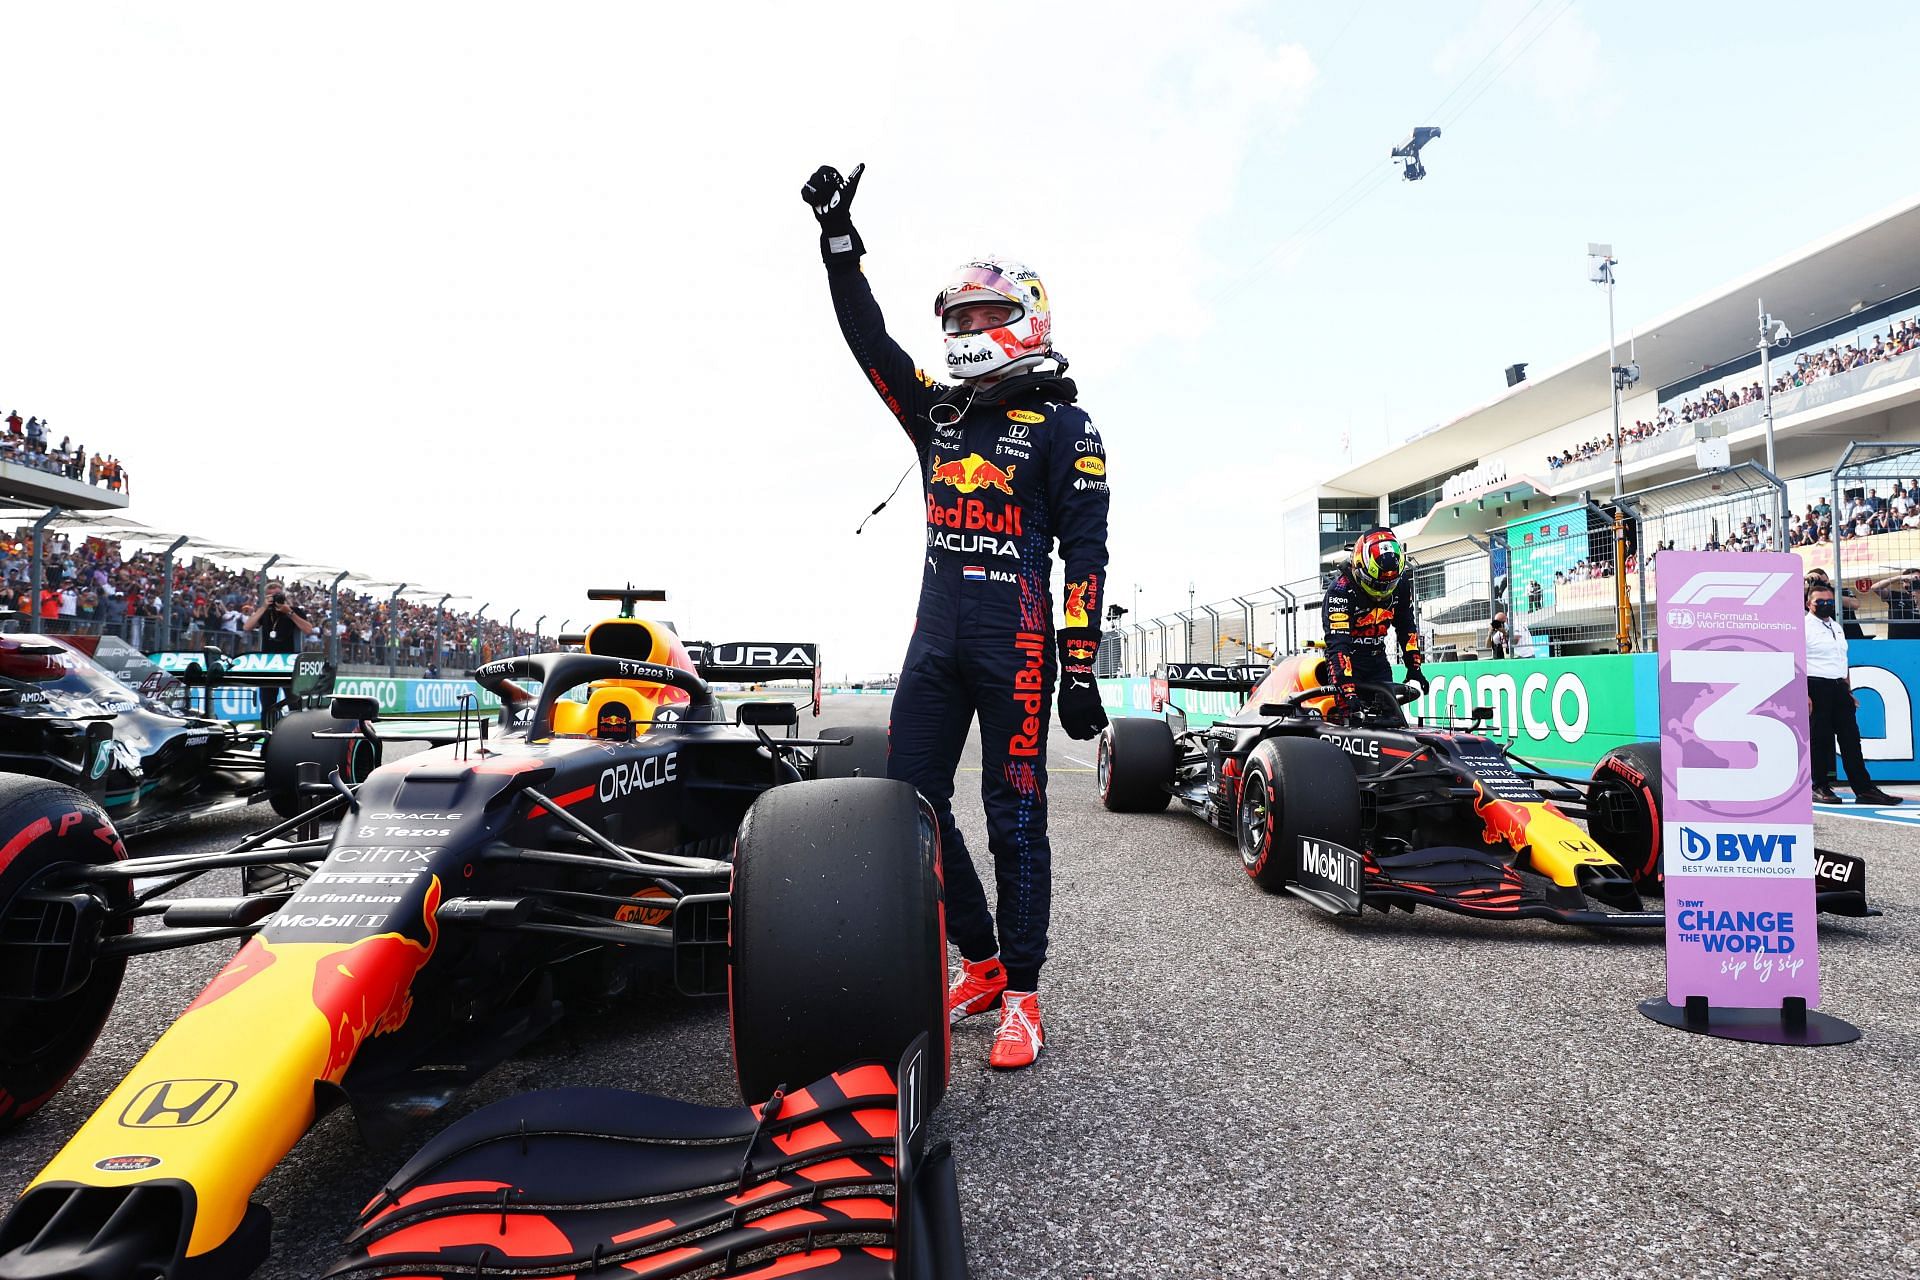 Pole position qualifier Max Verstappen of Red Bull Racing celebrates in parc ferme during qualifying ahead of the 2021 USGP in Austin, Texas. (Photo by Mark Thompson/Getty Images)